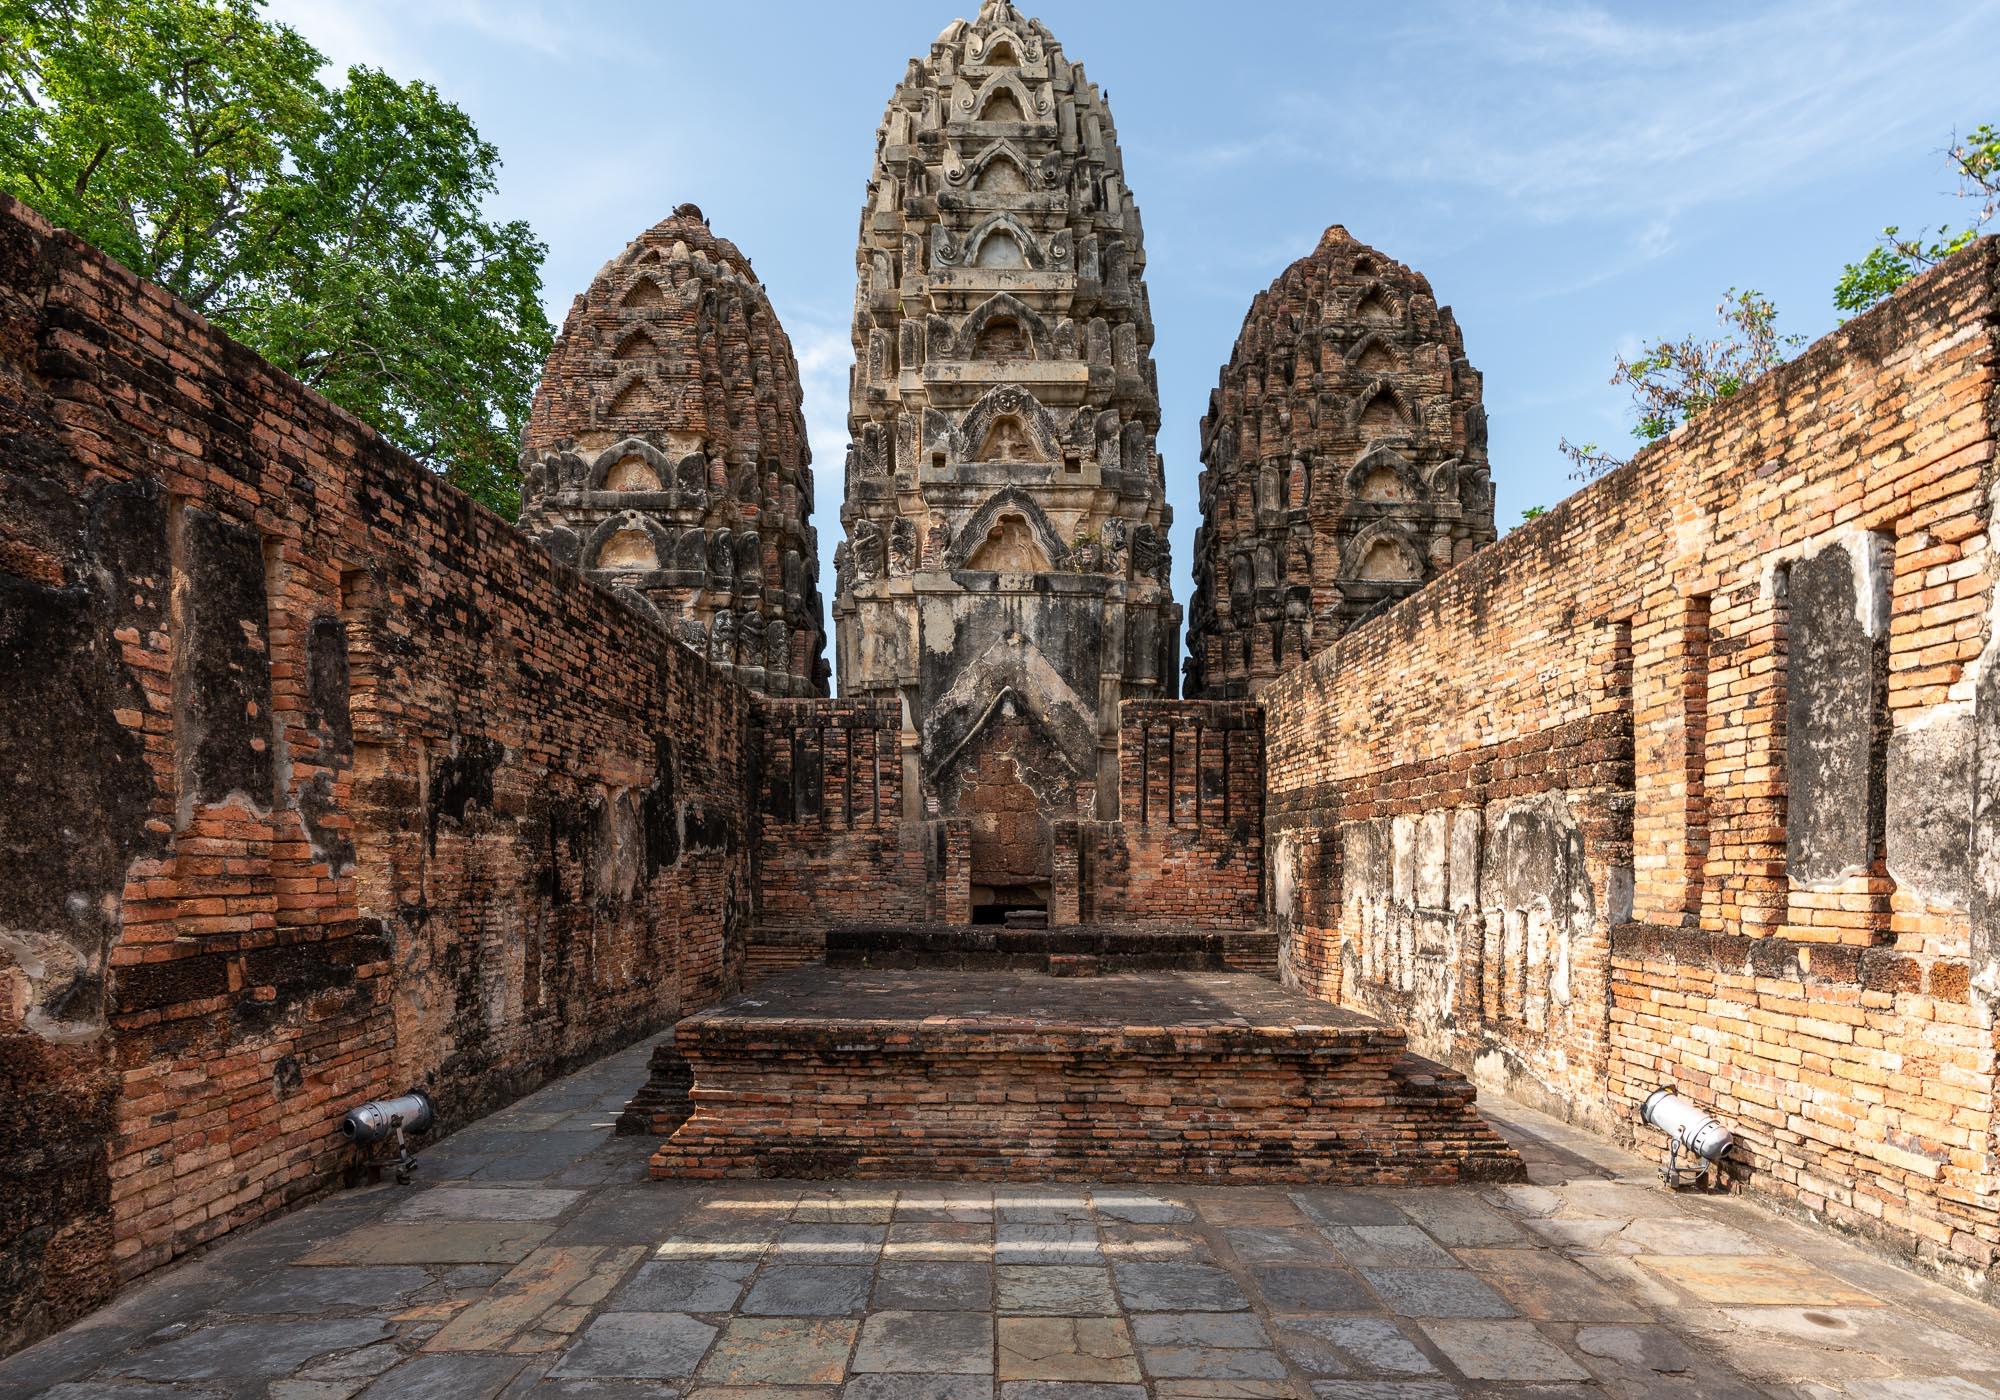 The three towers of Wat Si Sawai are similar in design to the Khmer temples at Angkor in Cambodia, with seven levels on each one. – © Michael Turtle